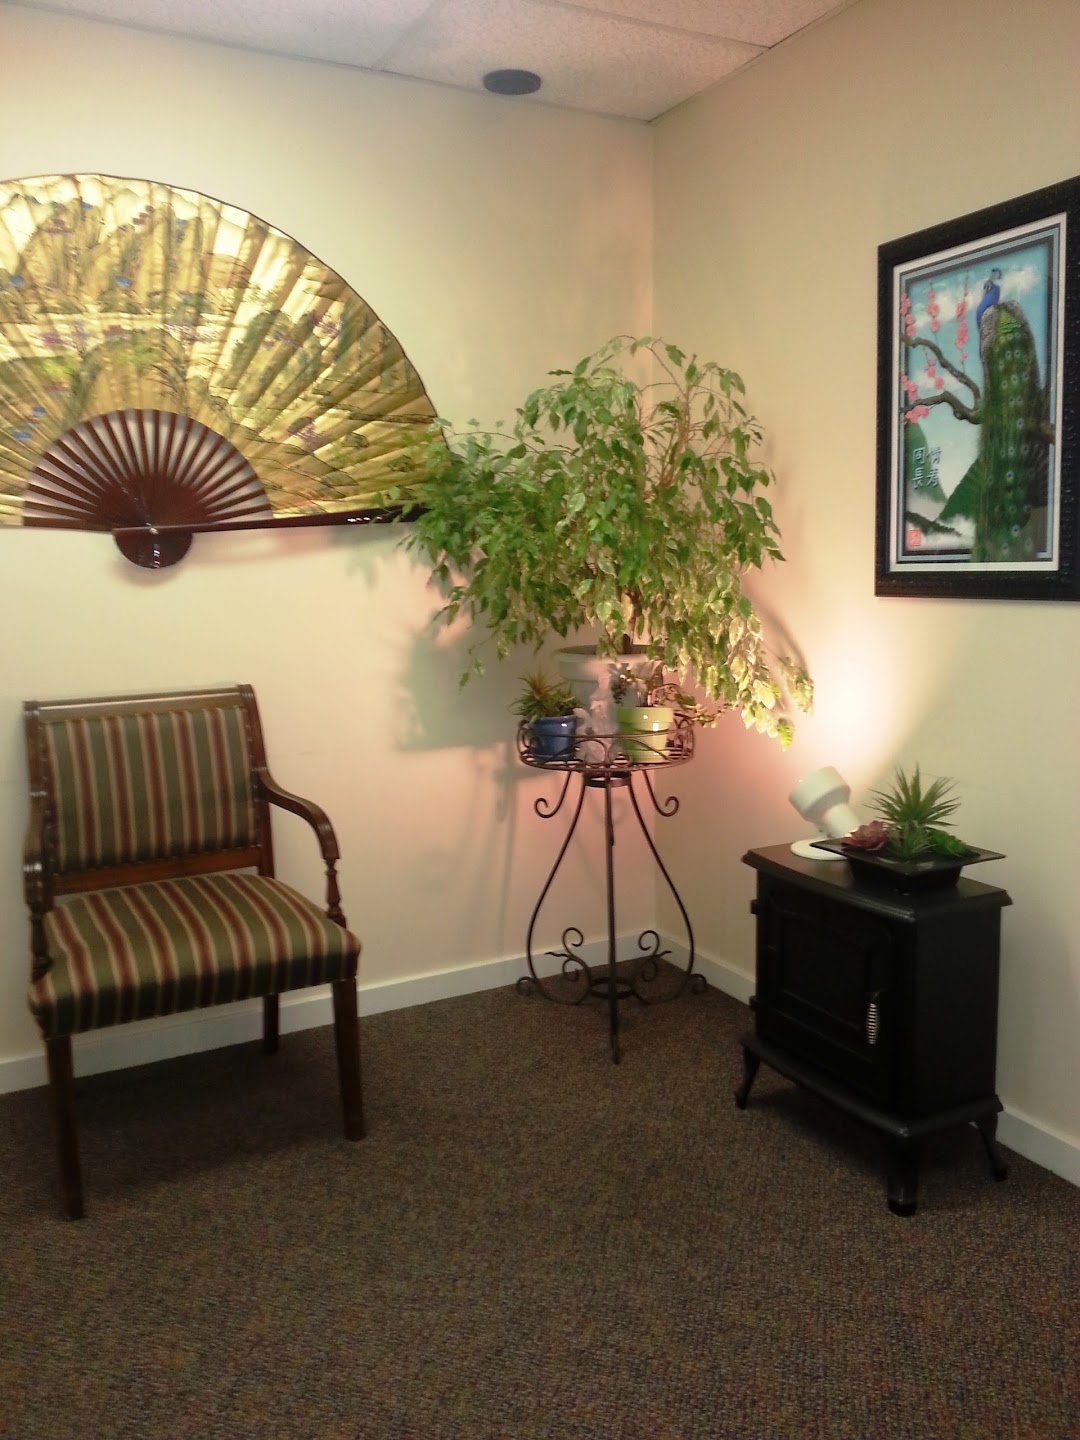 Acupuncture For Life - Dr. Janet Leidy, D.H.Sc., L.Ac., Dipl.Ac.